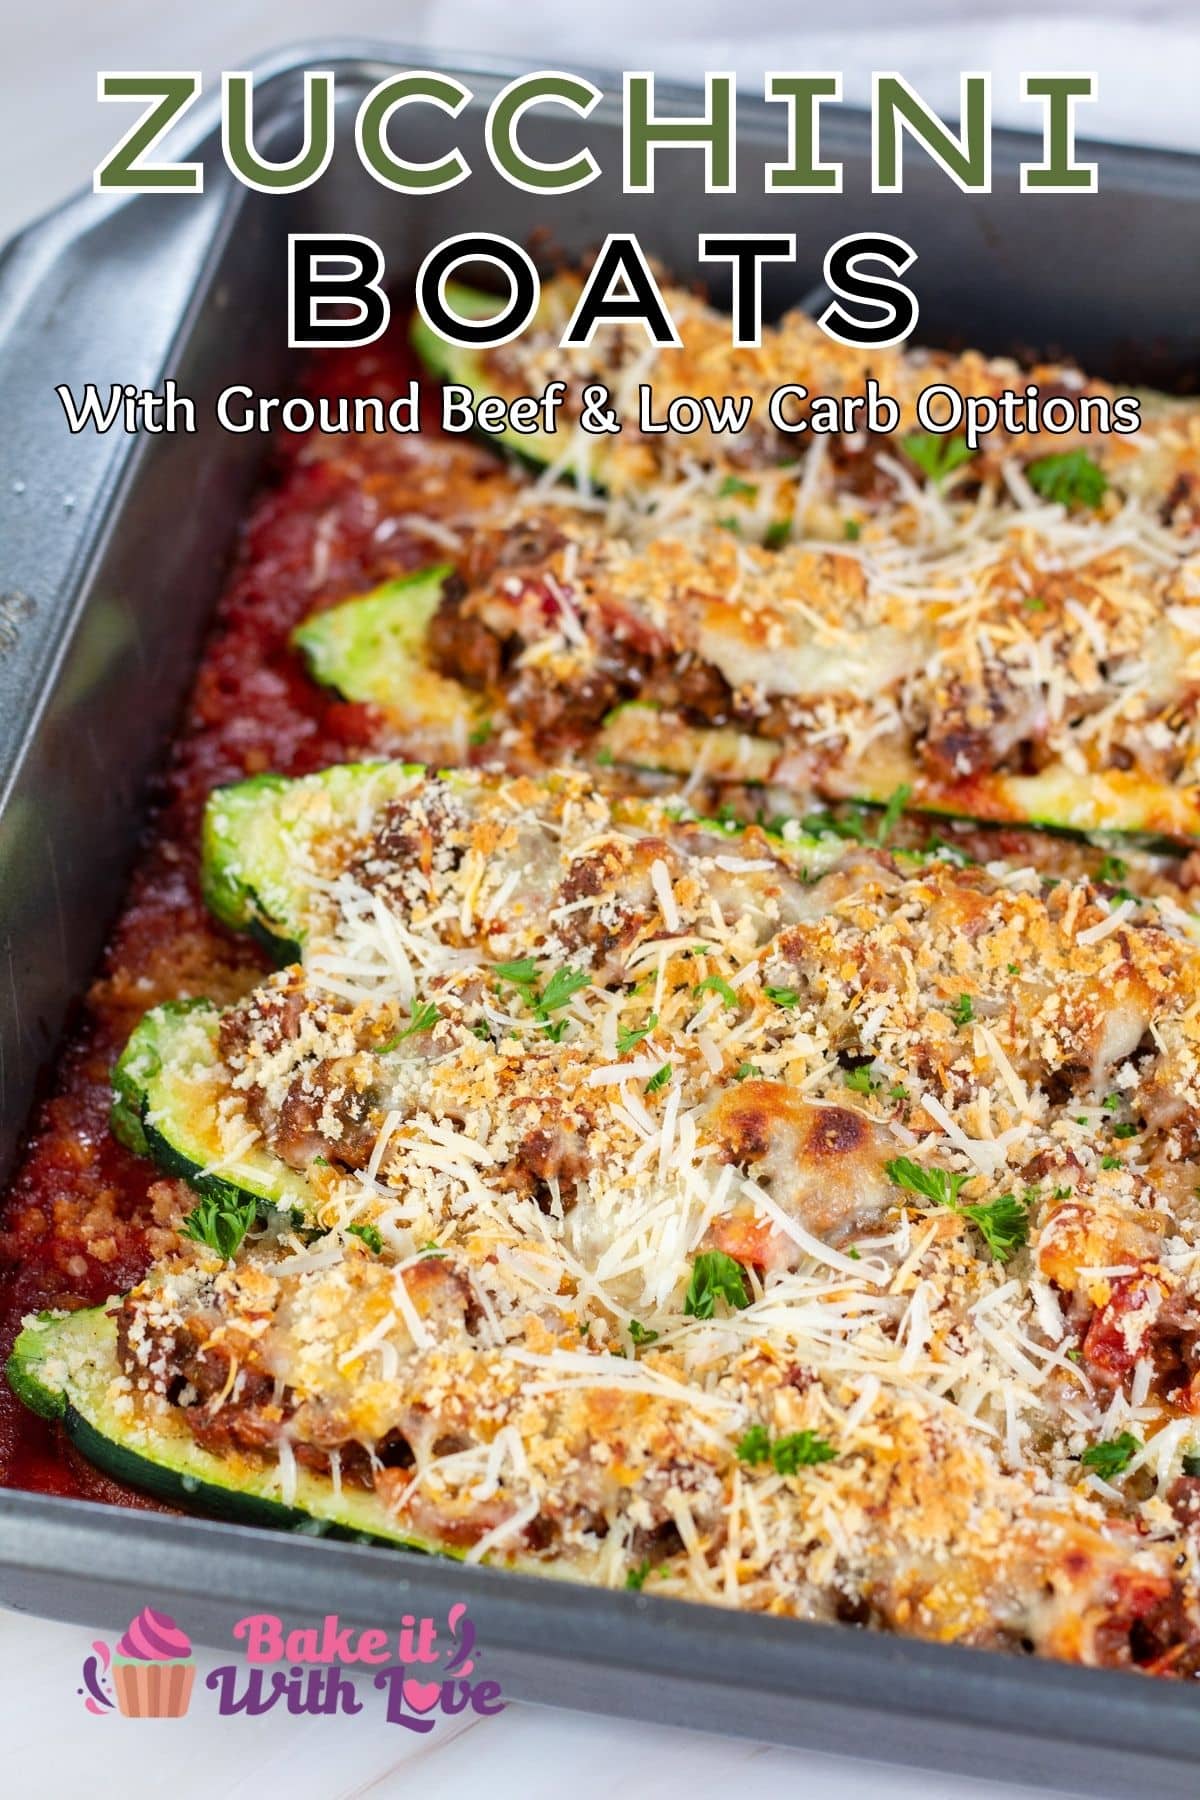 Best Zucchini Boats With Ground Beef: An Easy Vegetable Dish